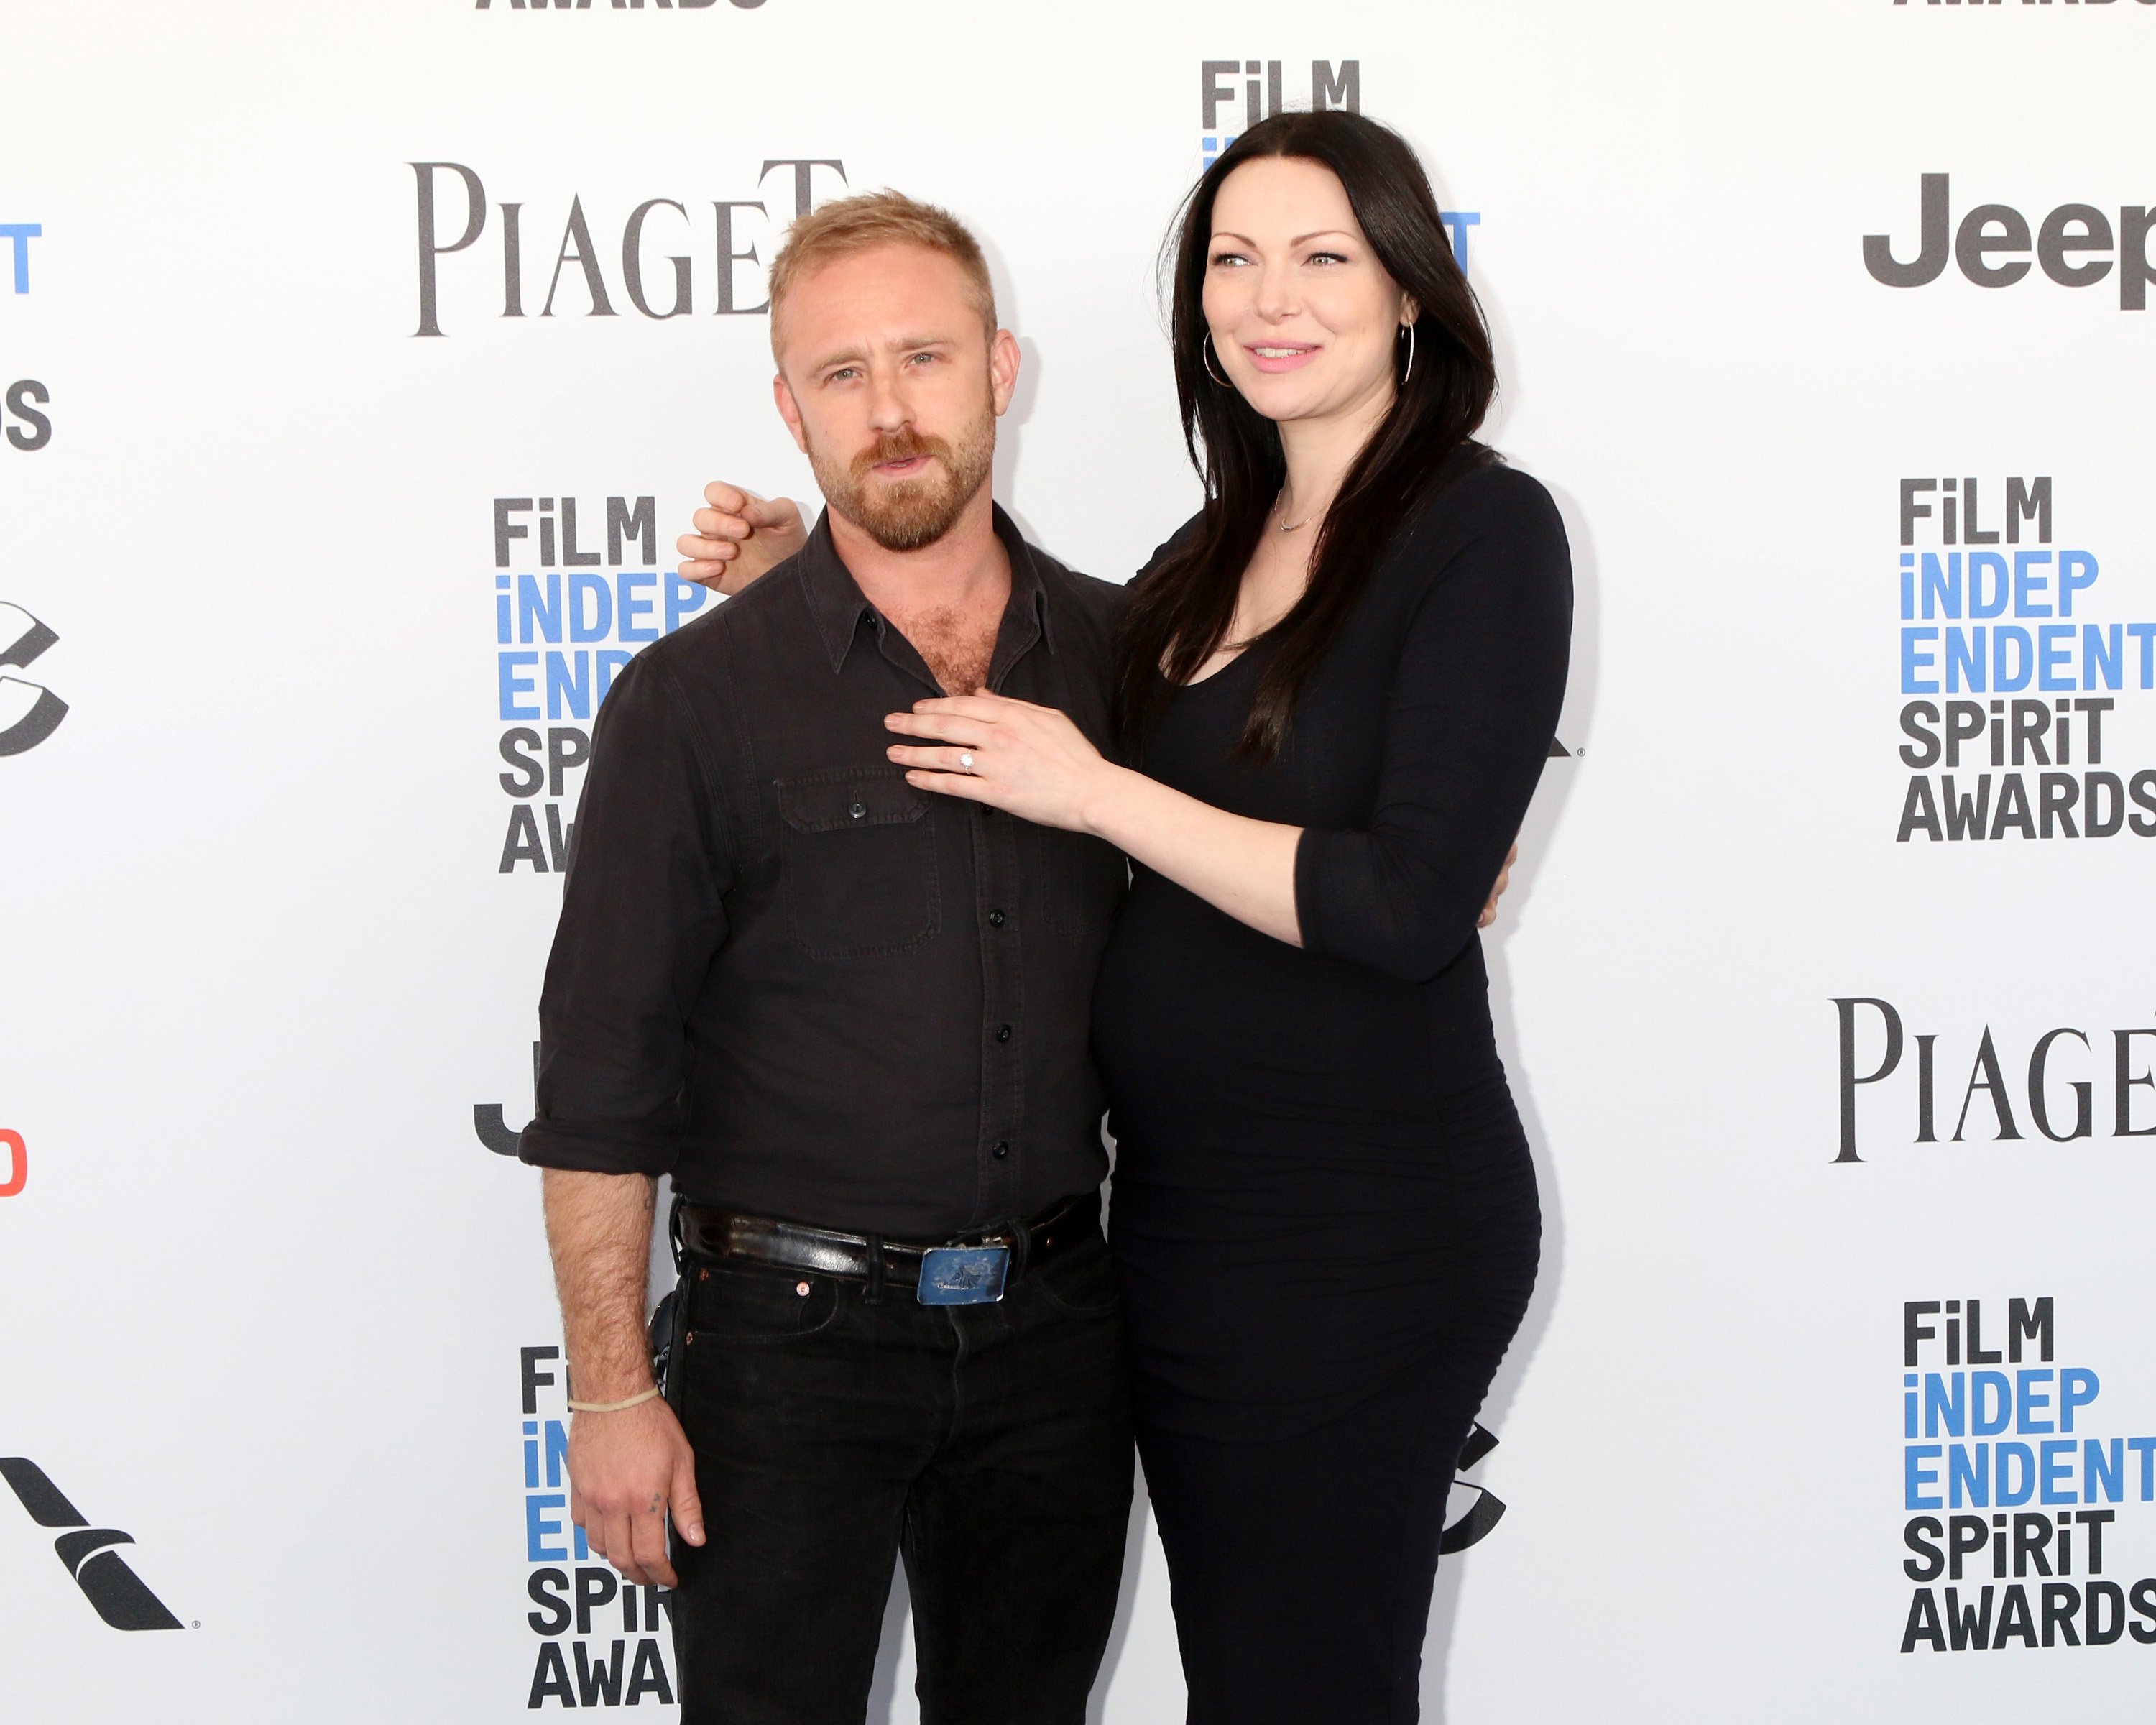  Ben Foster and Laura Prepon arrive at the Independent Spirit Awards on February 25, 2017. | Photo: Shutterstock